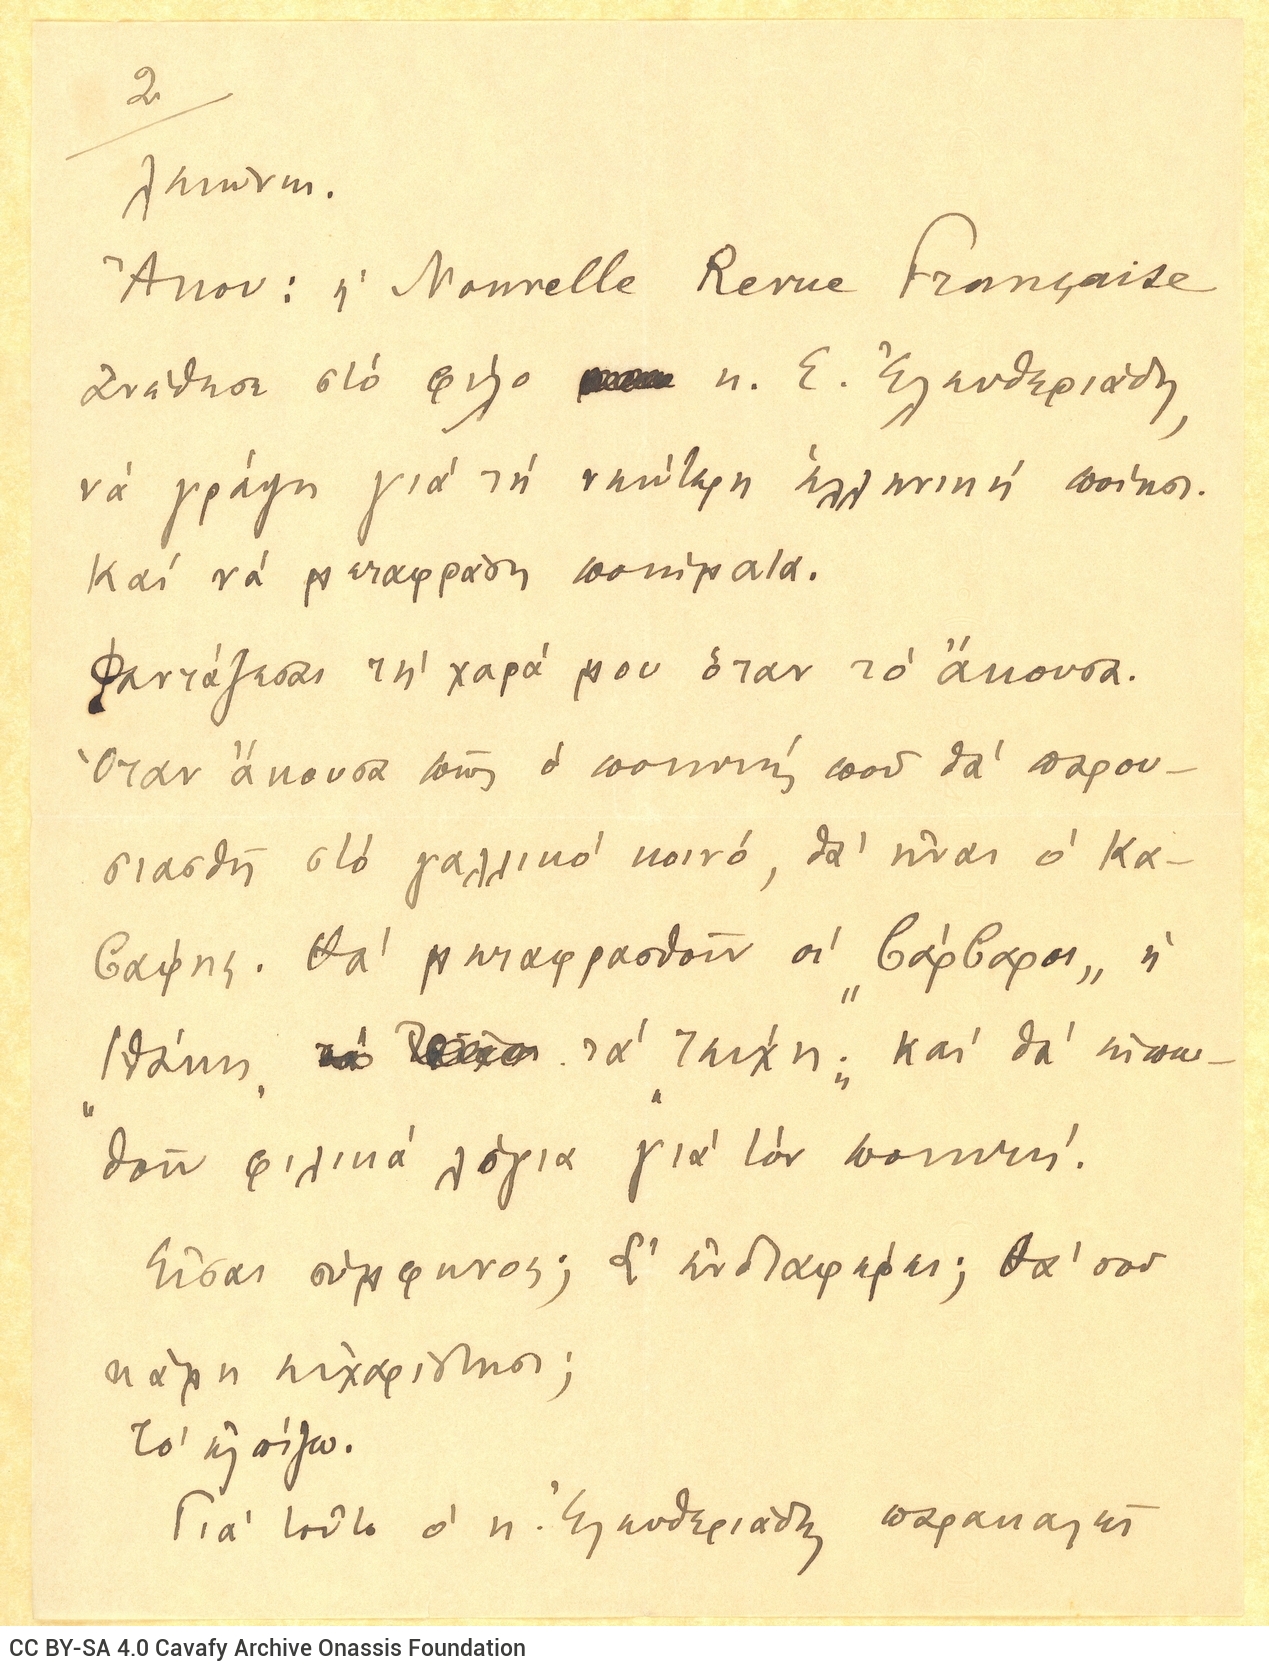 Handwritten letter on the rectos of three sheets. Blank versos. Page numbers "2" and "3 are noted at top left. The sender, a 